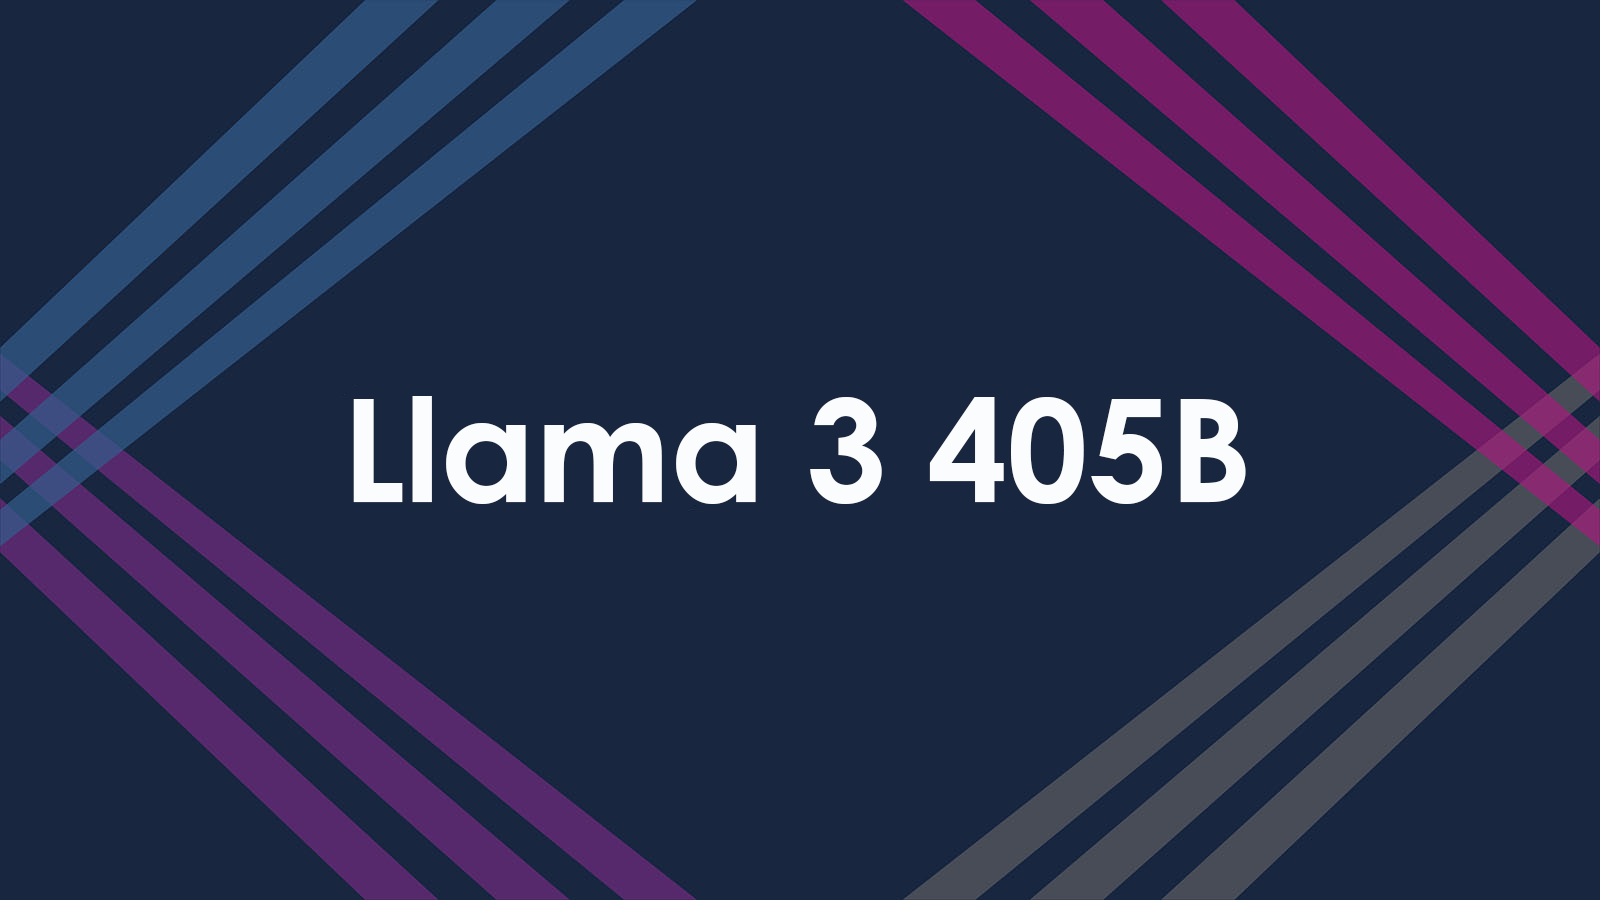 Three Predictions for the Upcoming Llama 3 405B Announcement